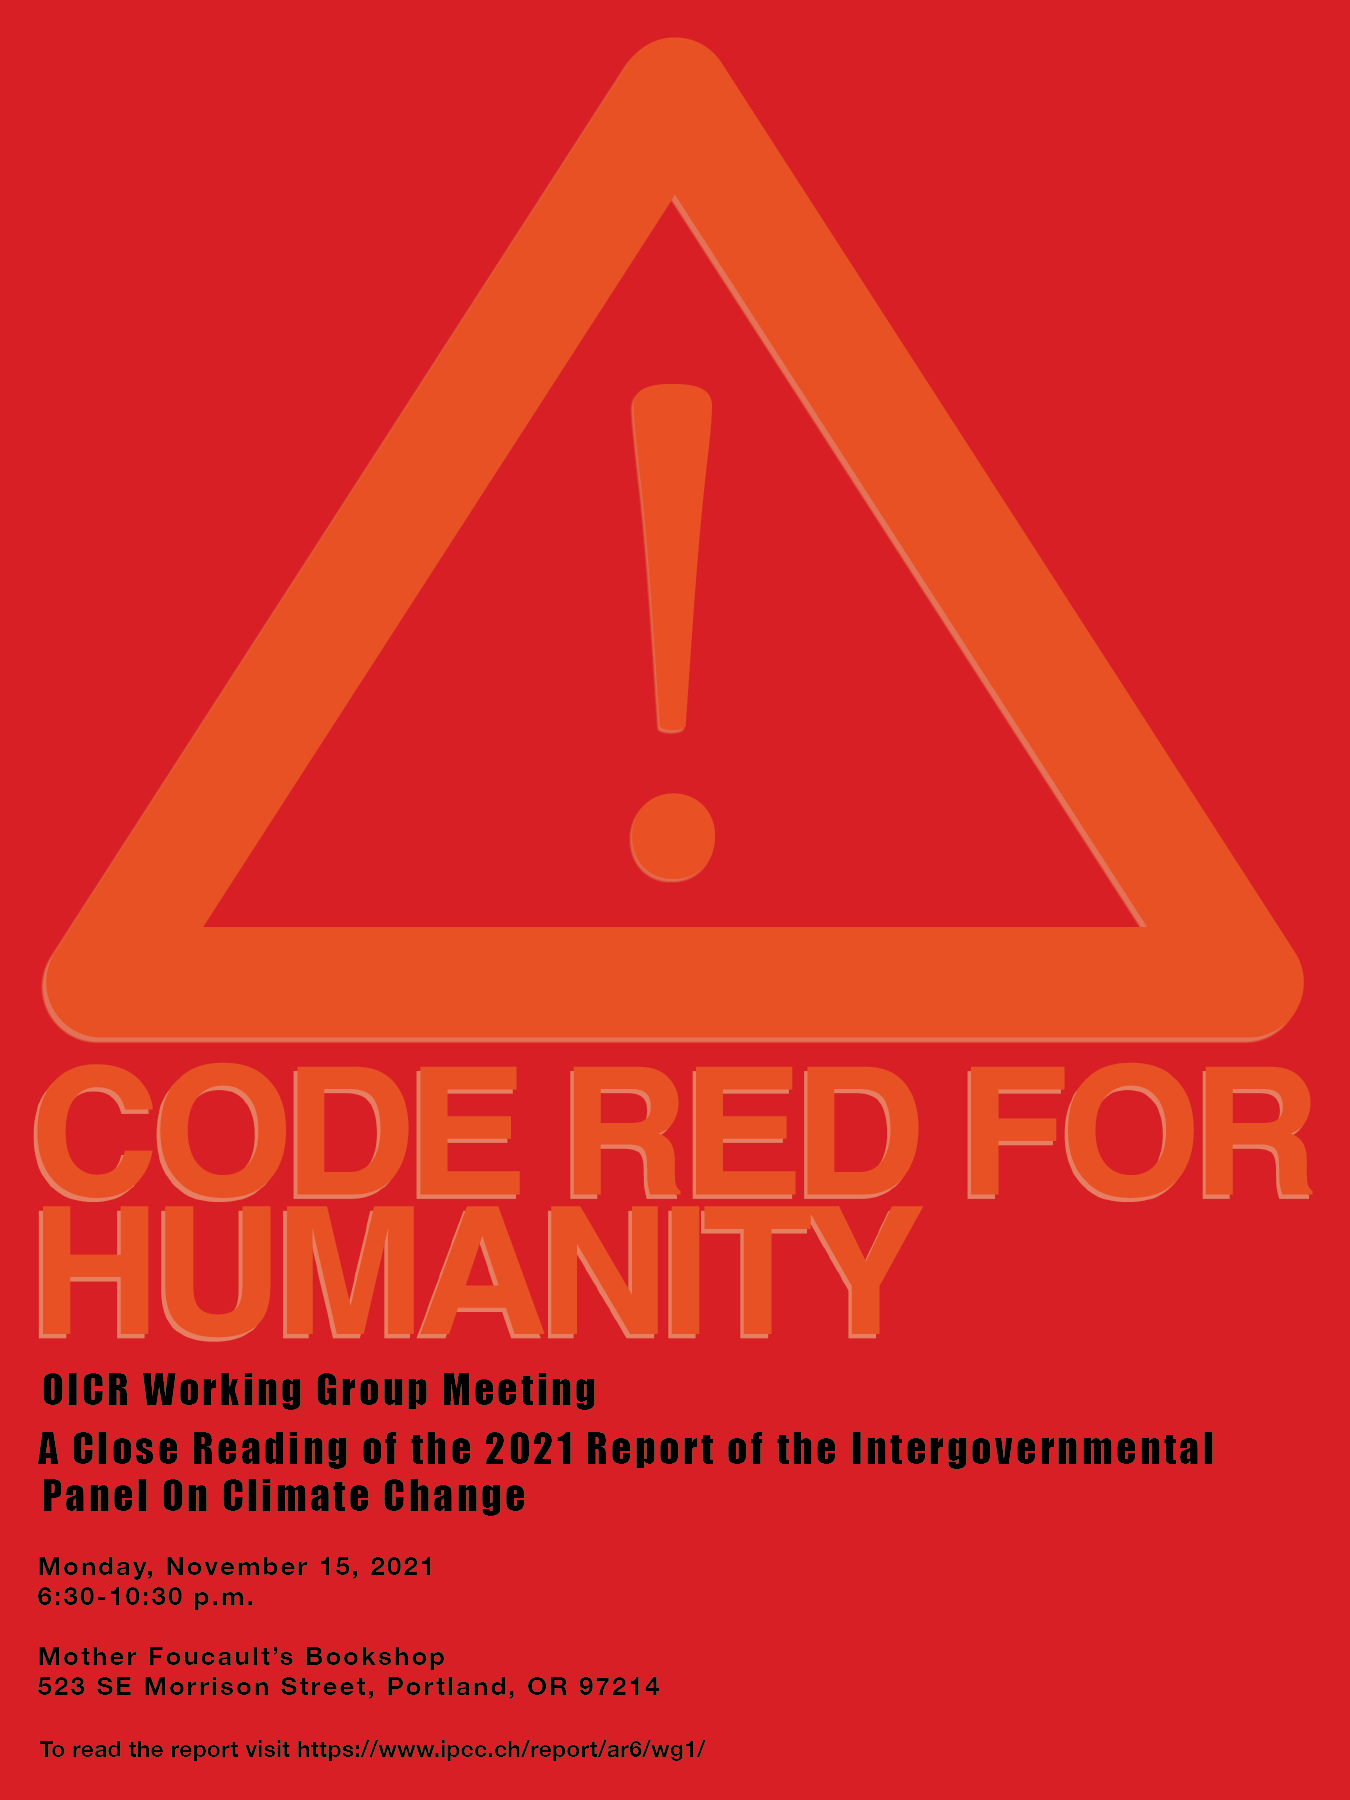 “Code Red for Humanity”: A Close Reading of the August 2021 Report of the Intergovernmental Panel on Climate Change